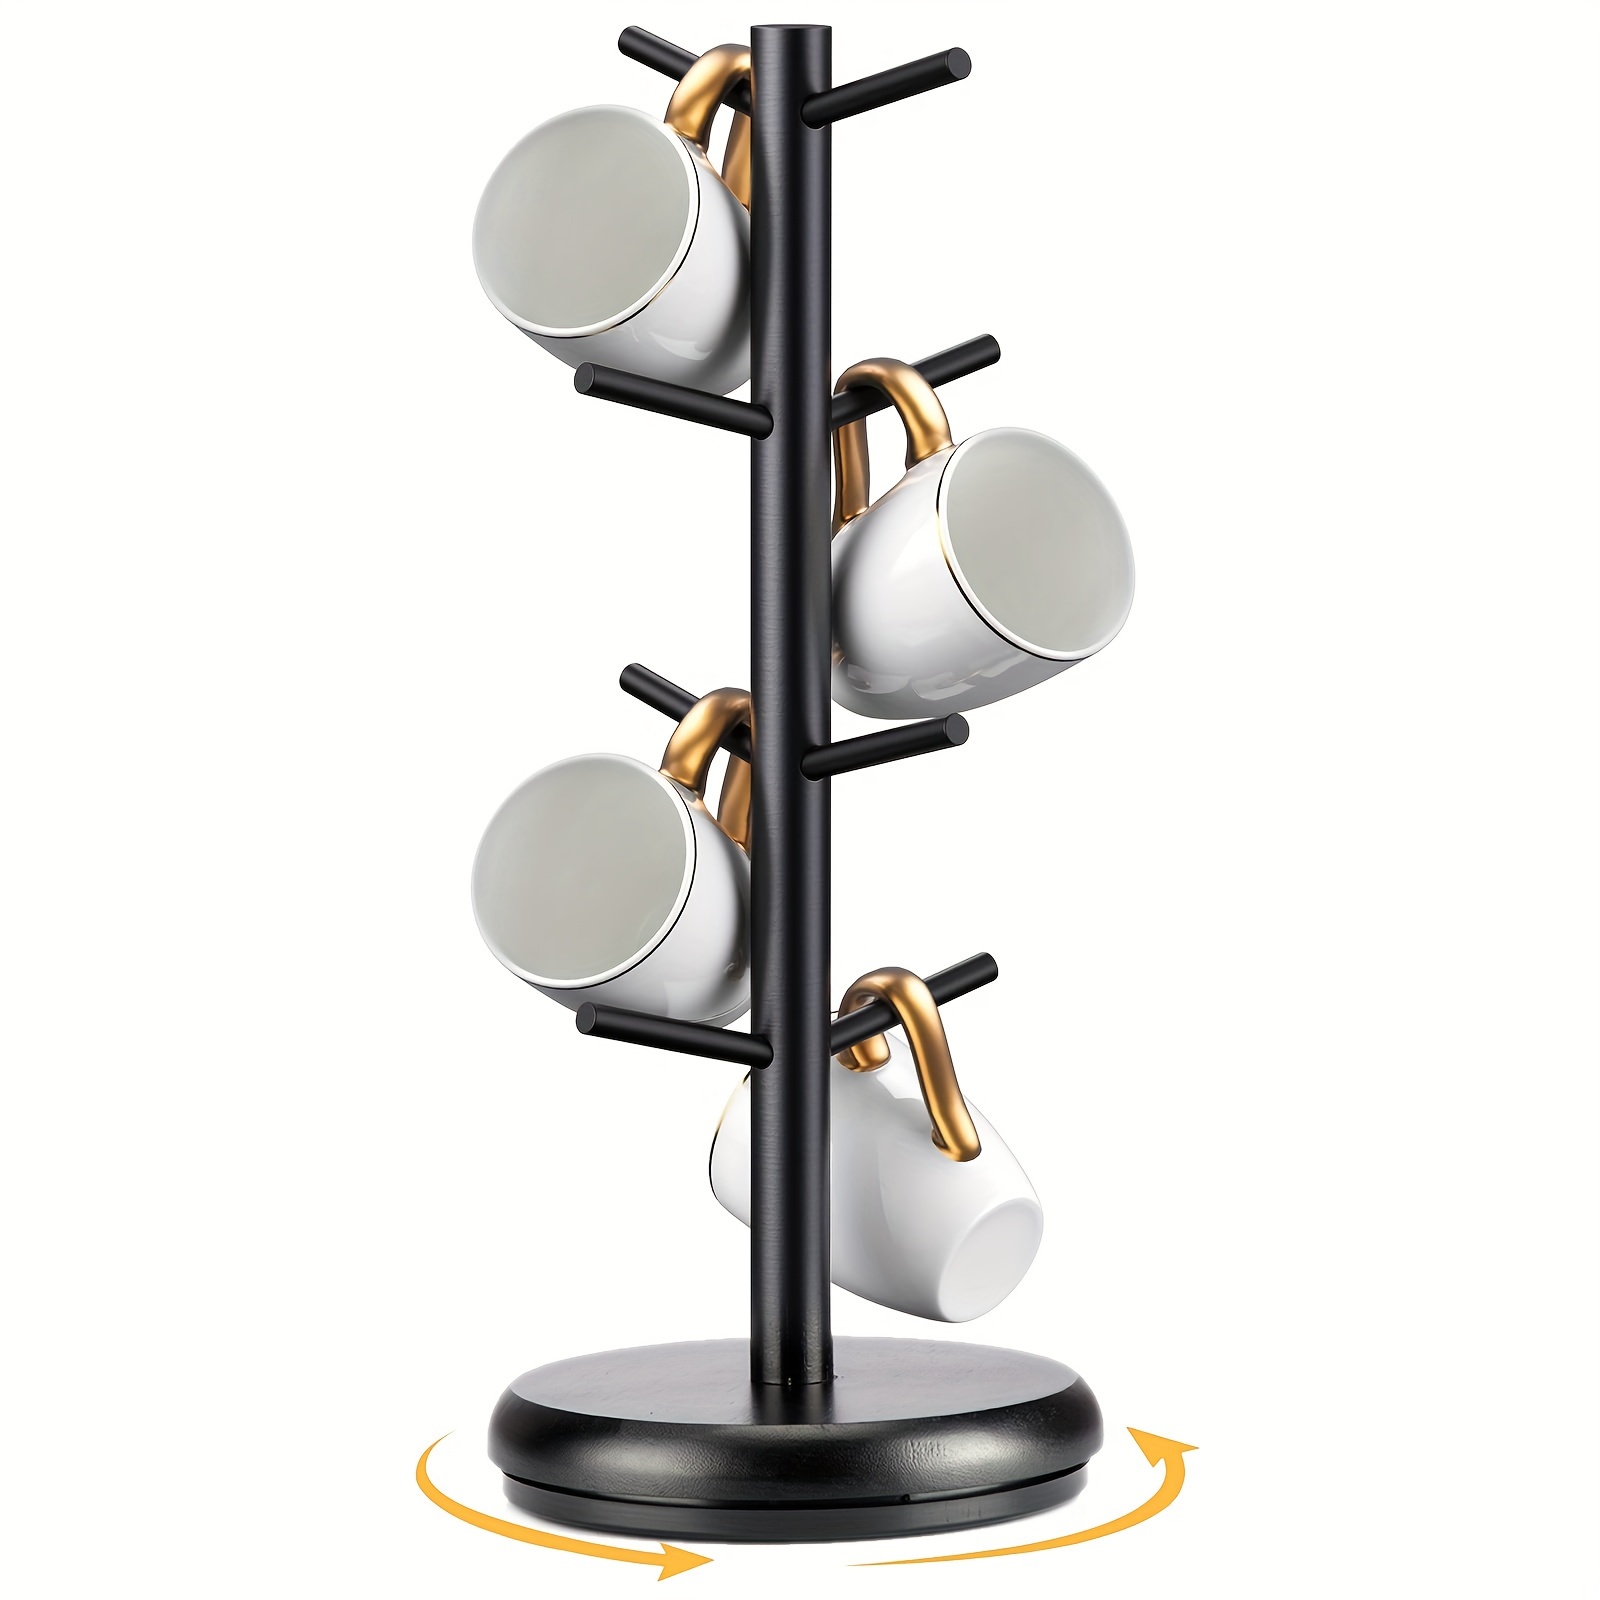 

Fashion Style Wooden Mug Holder With Painted Finish - Easy To Install Rotating Multi-level Cup Stand, Counter Top Storage Rack For 8 Mugs